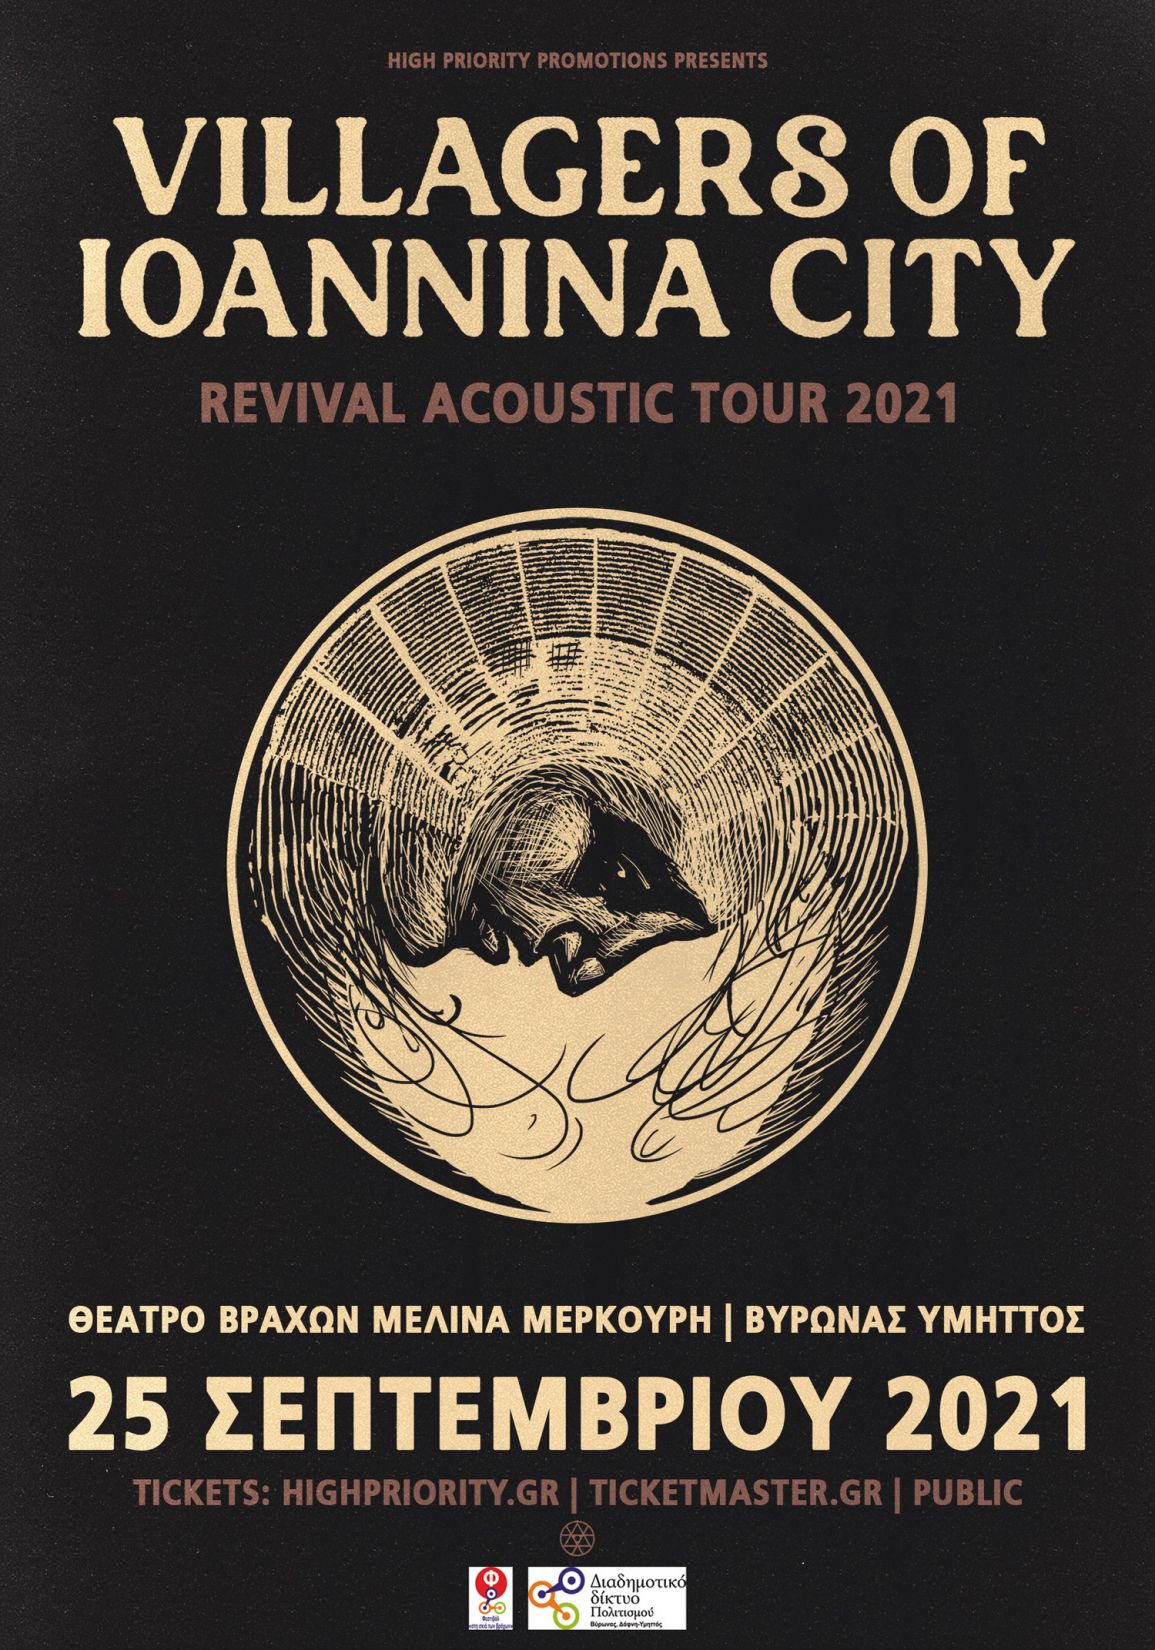 Villagers of Ioannina City   Accoustic Tour 2021